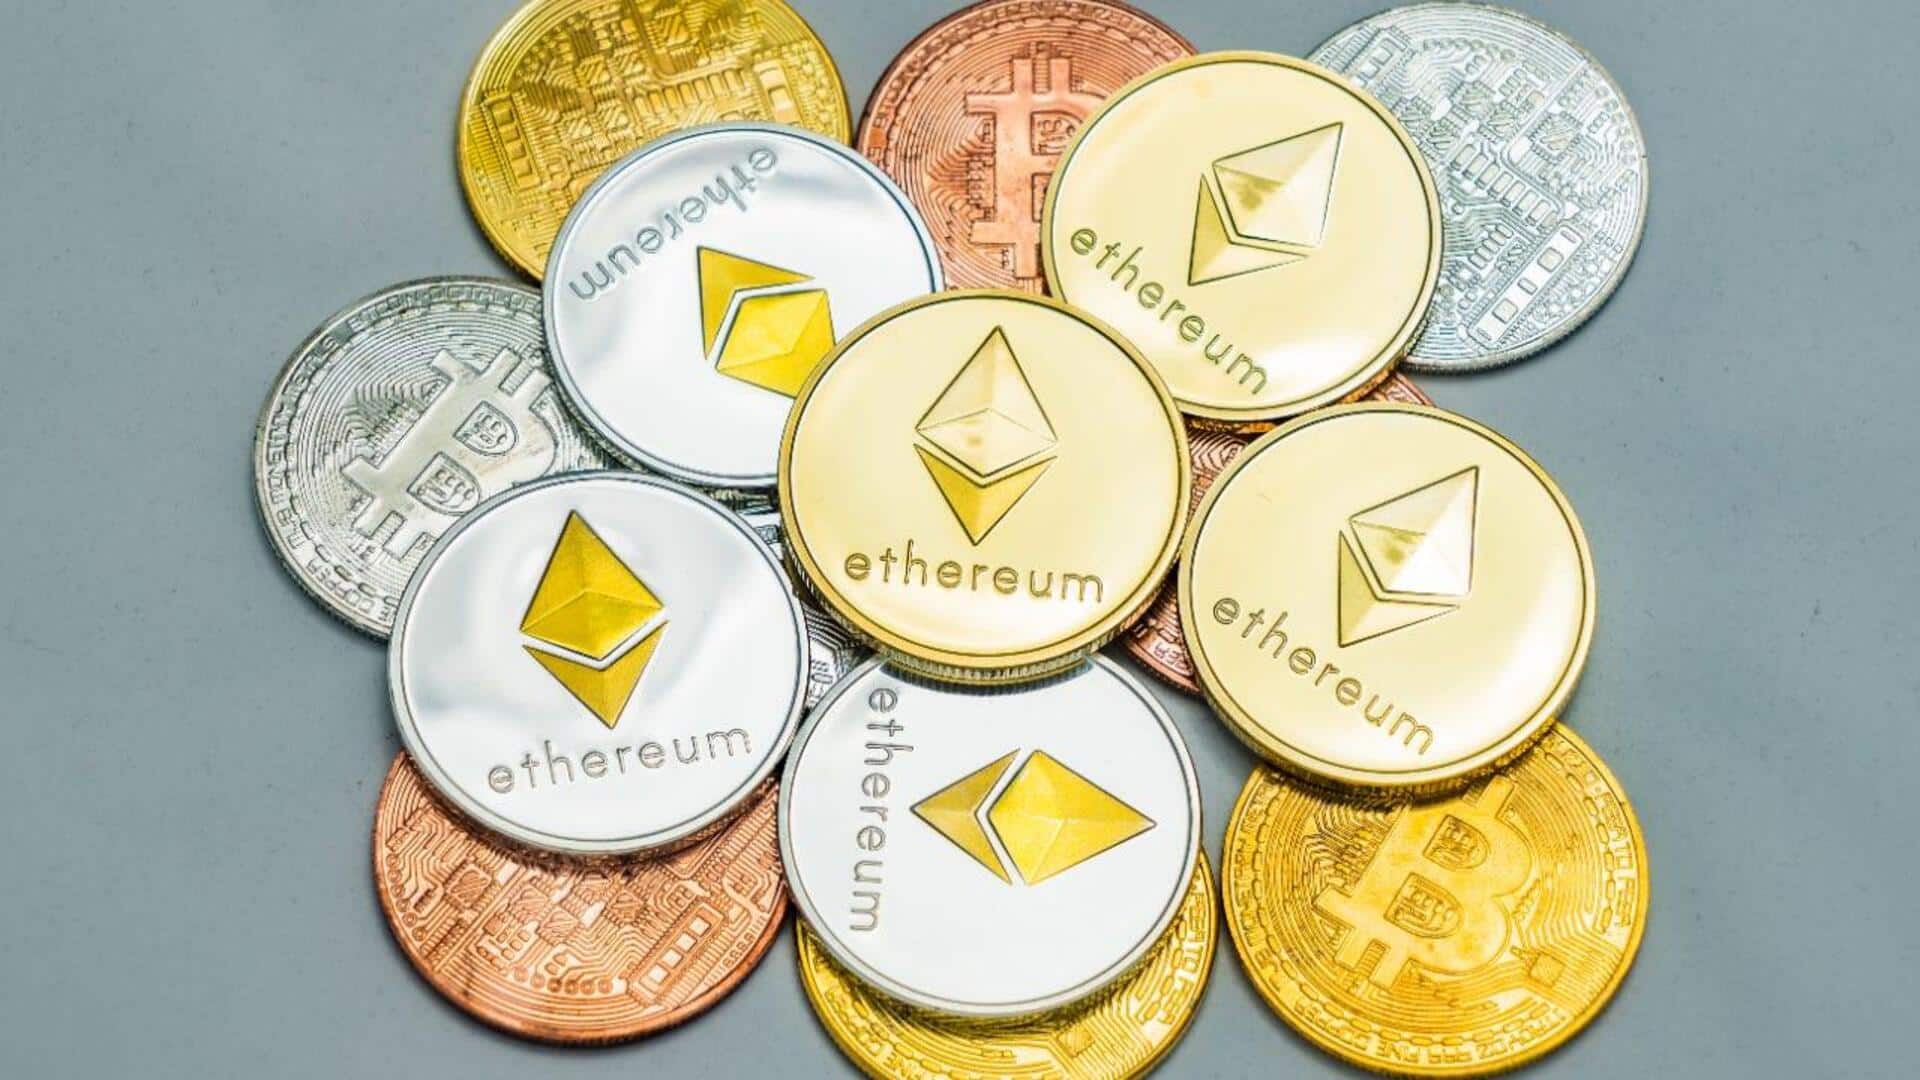 Cryptocurrency prices: Check today's rates of Bitcoin, Tether, Ethereum, Dogecoin